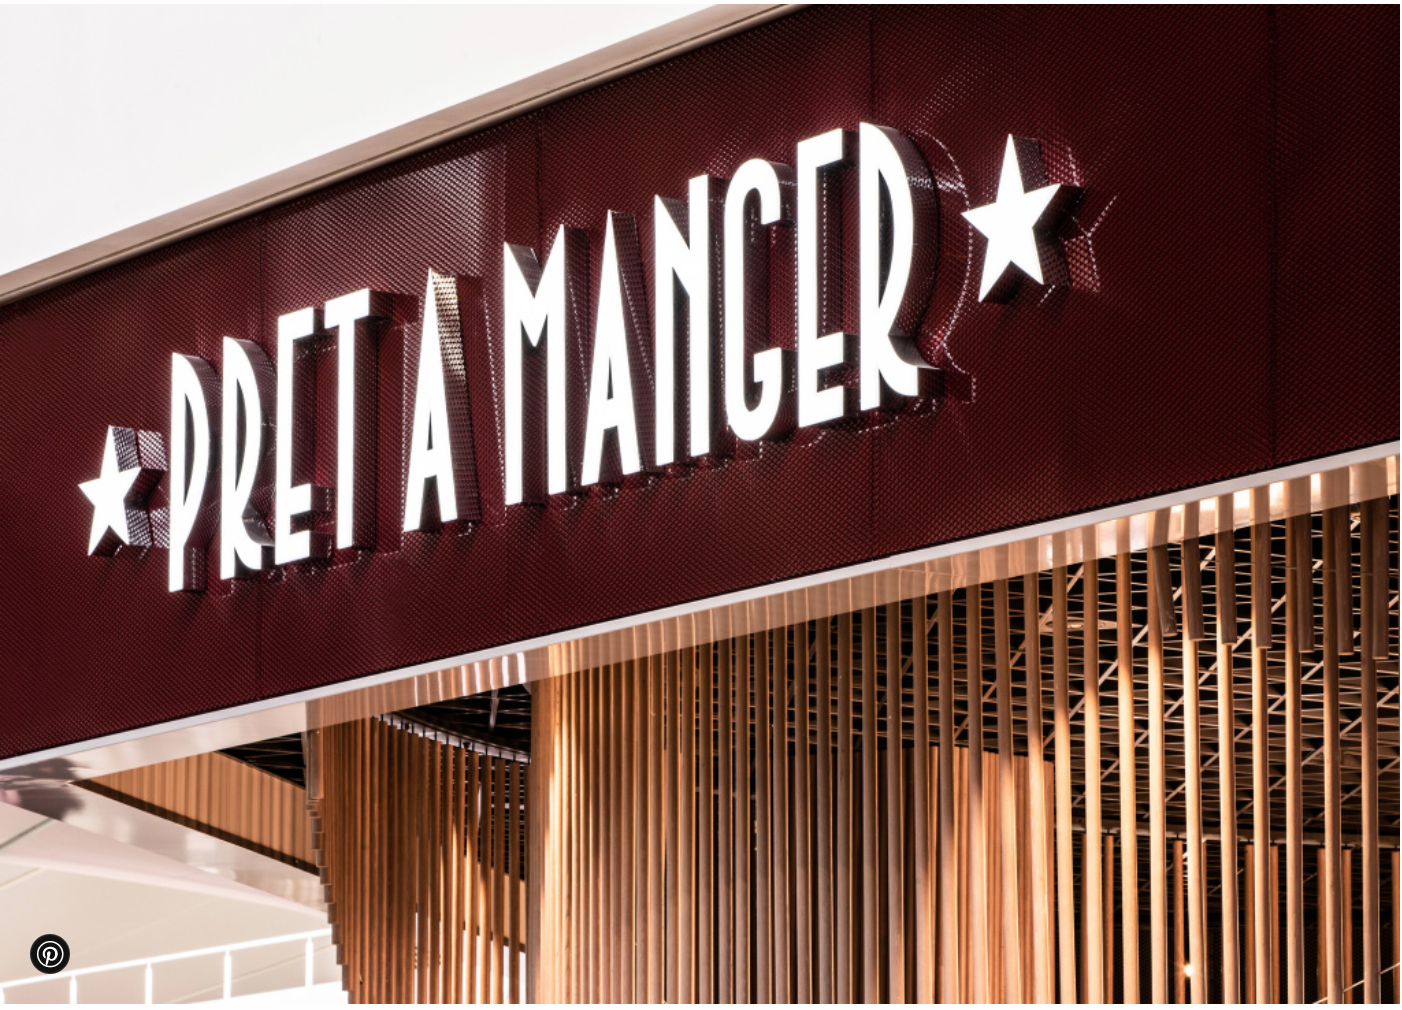 Pret’s famous Christmas menu will be available for the first time in Northern Ireland when shop opens in December